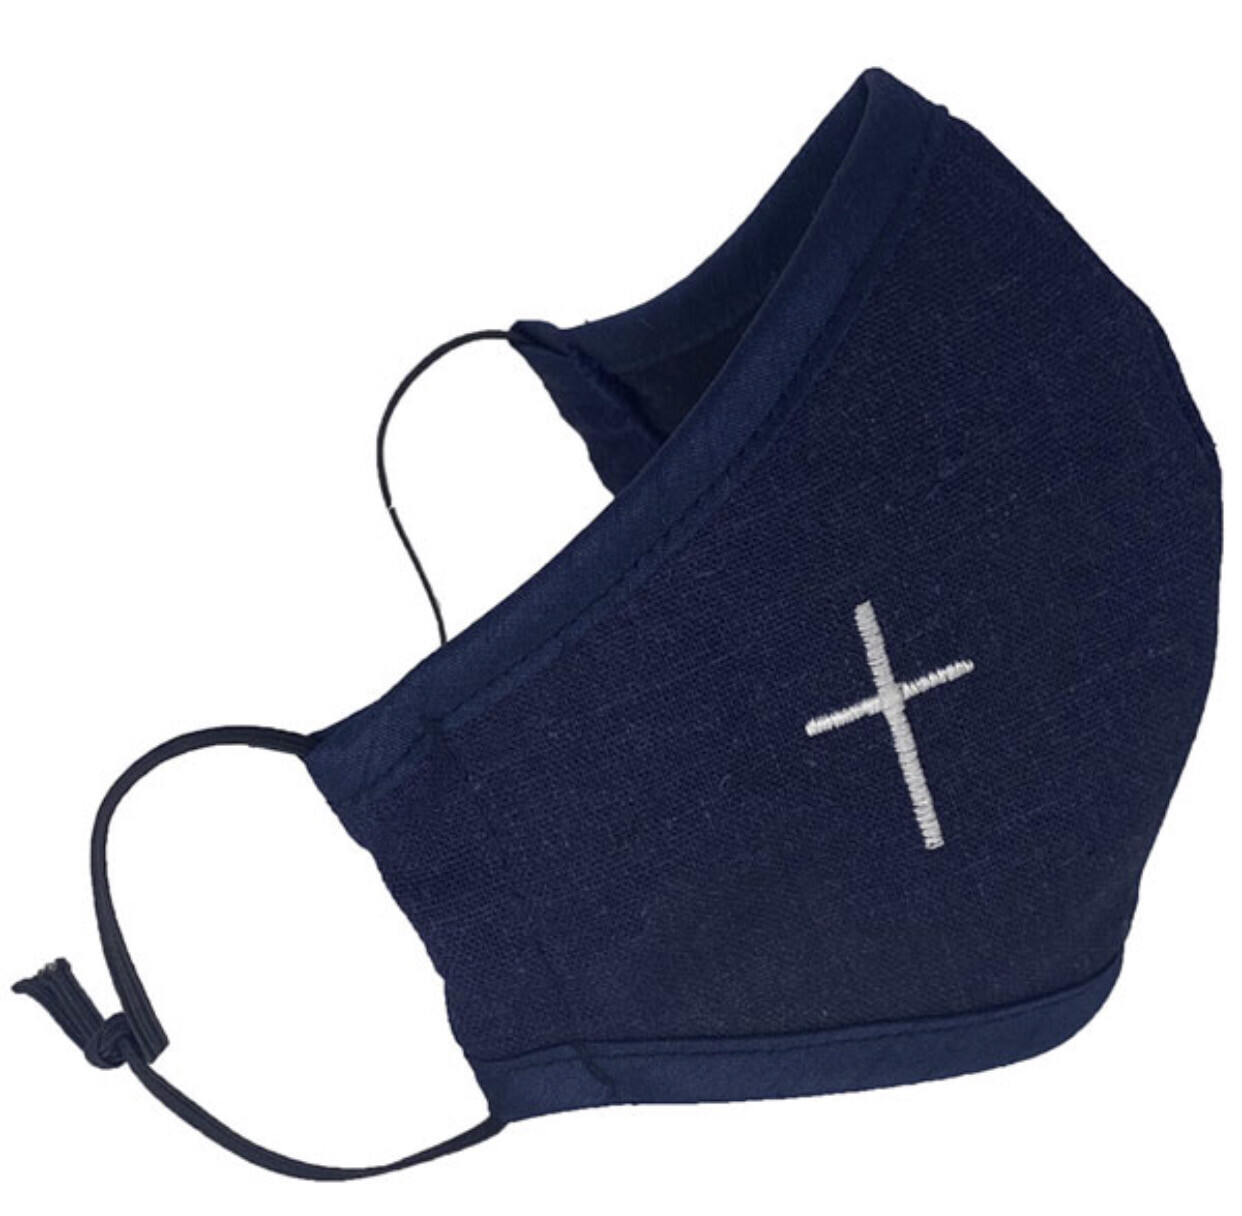 Navy Blue Mask With White Cross Embroidery (Child Size)